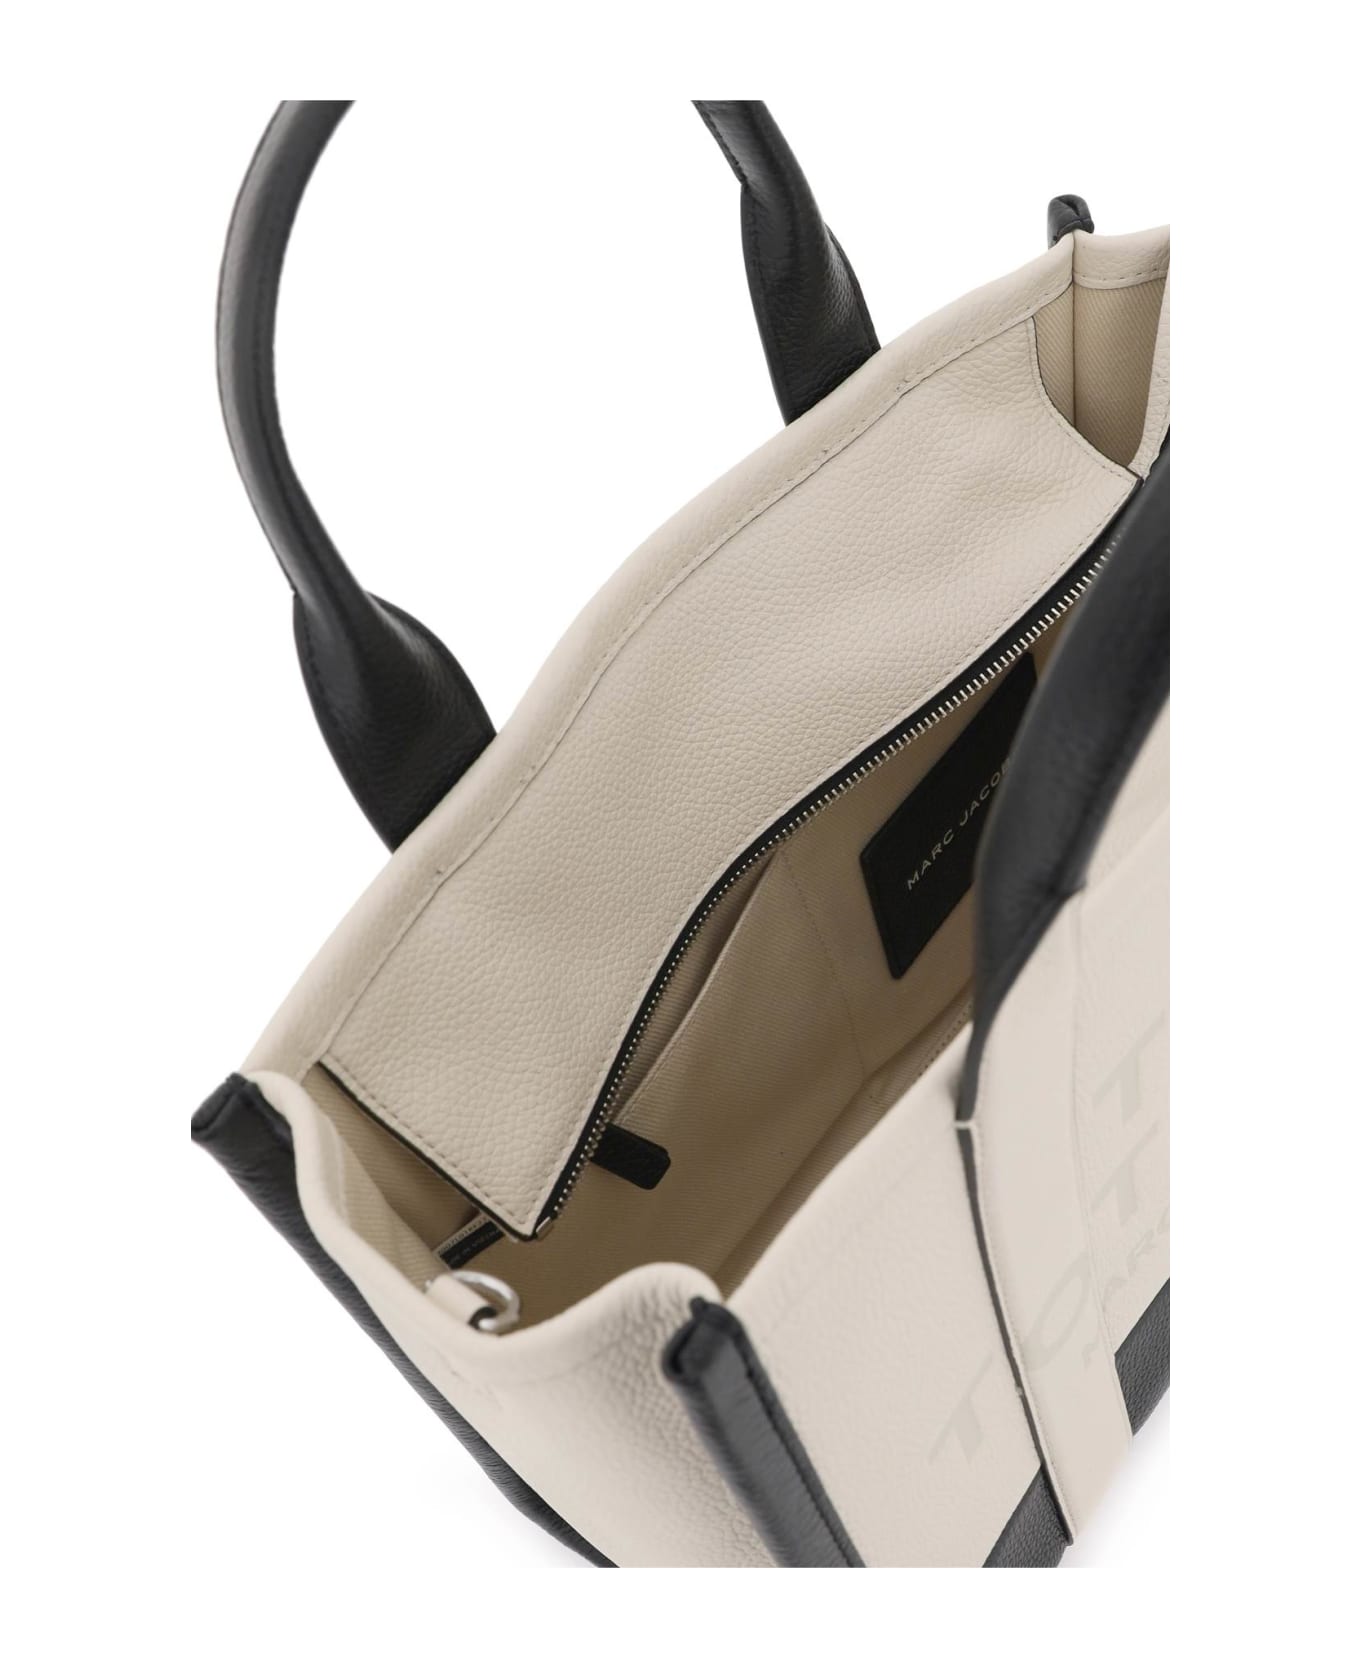 Marc Jacobs The Colorblock Medium Tote Bag - Ivory